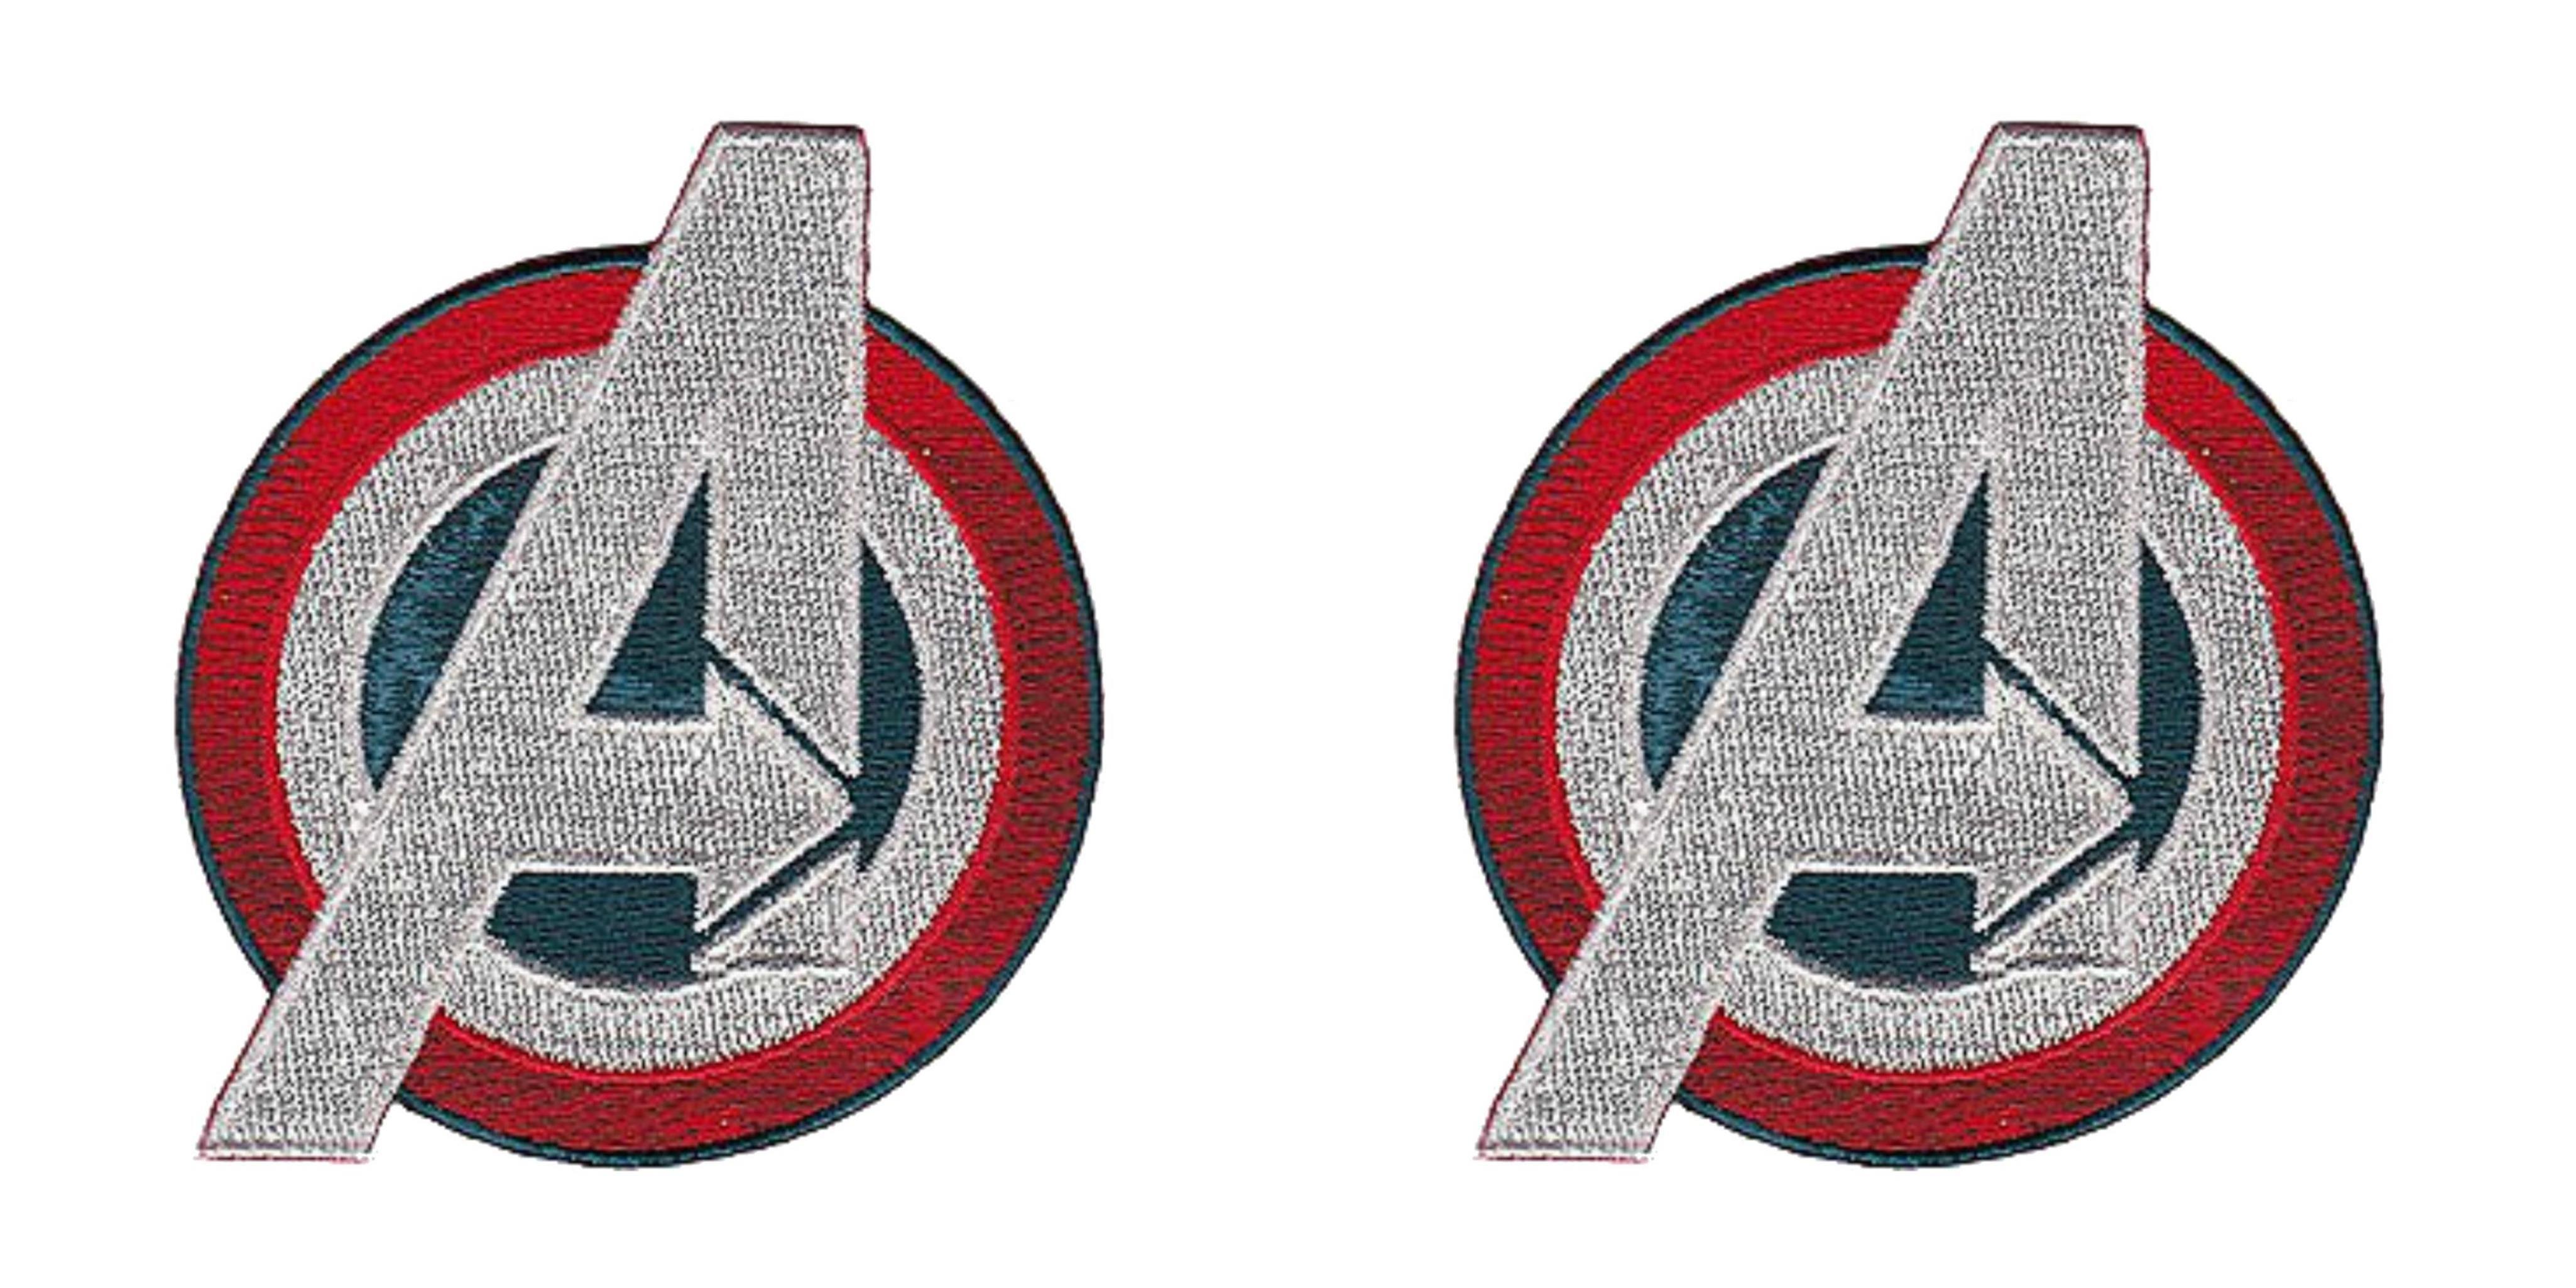 Red and White Oval Logo - Superheroes Marvel Comics Avengers Red, White, and Blue Logo 3